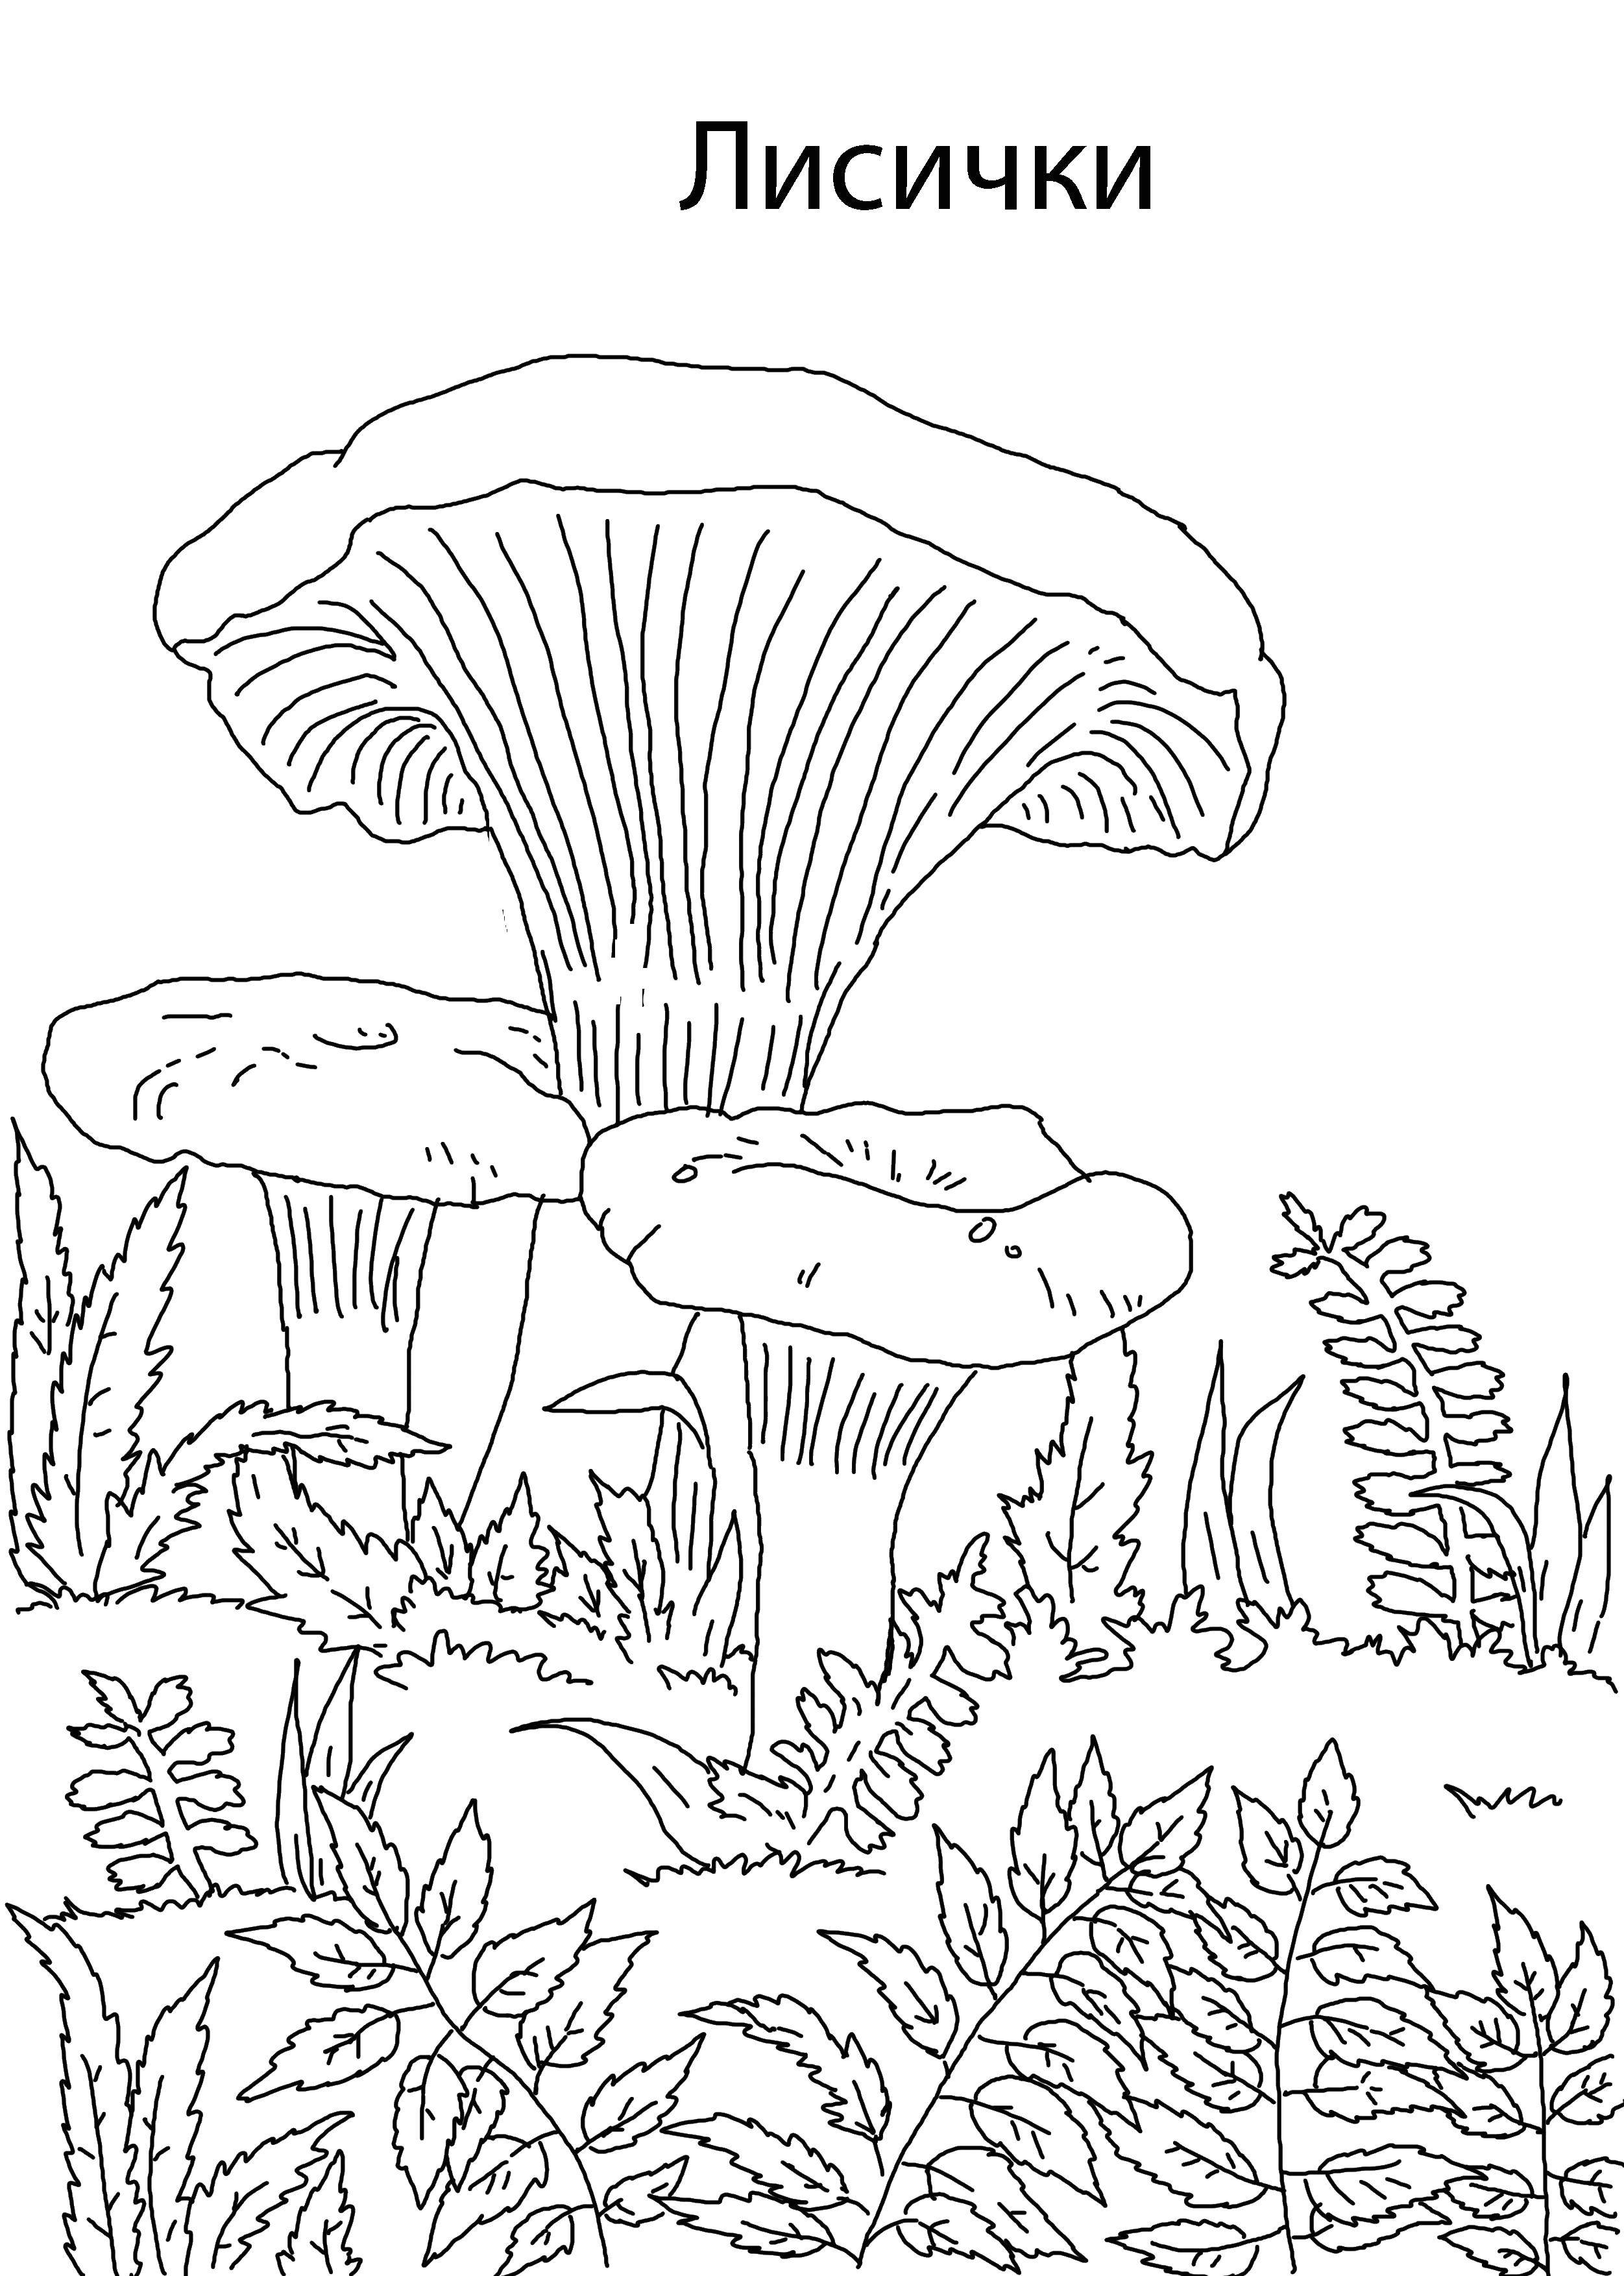 Coloring Chanterelle mushrooms. Category mushrooms. Tags:  mushrooms, chanterelle.